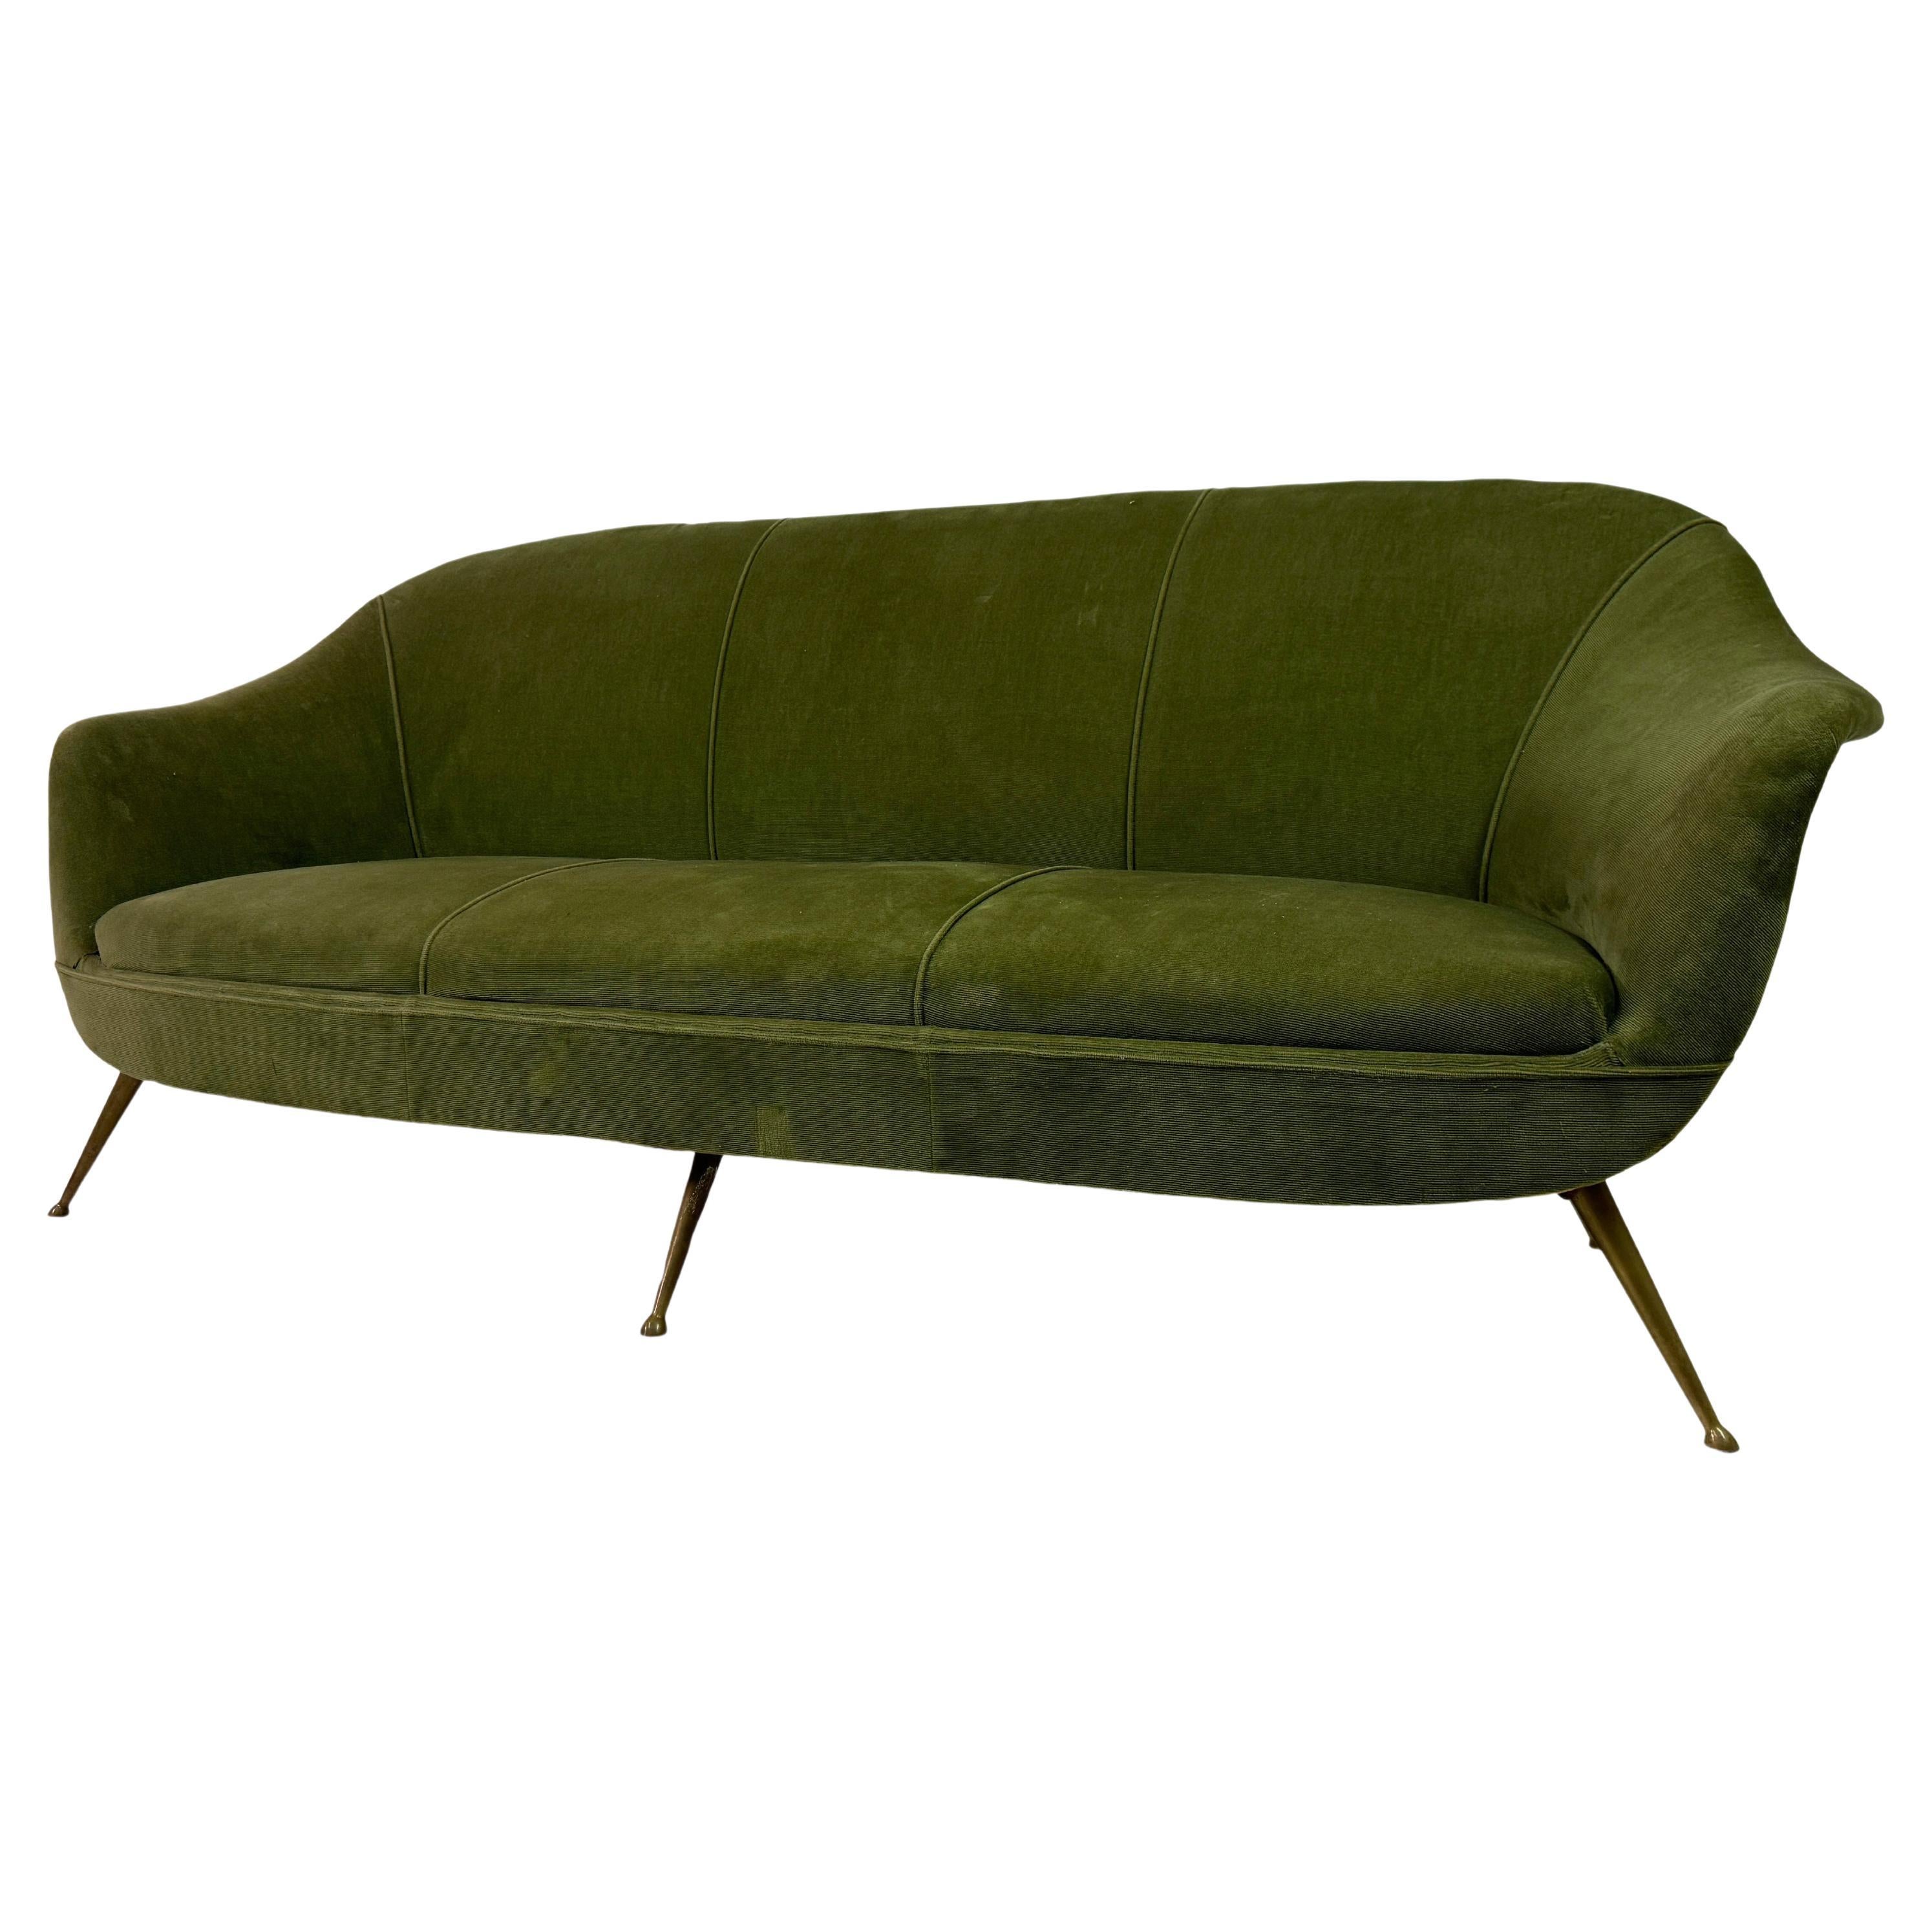 1960s Italian Sofa With Brass Legs For Sale